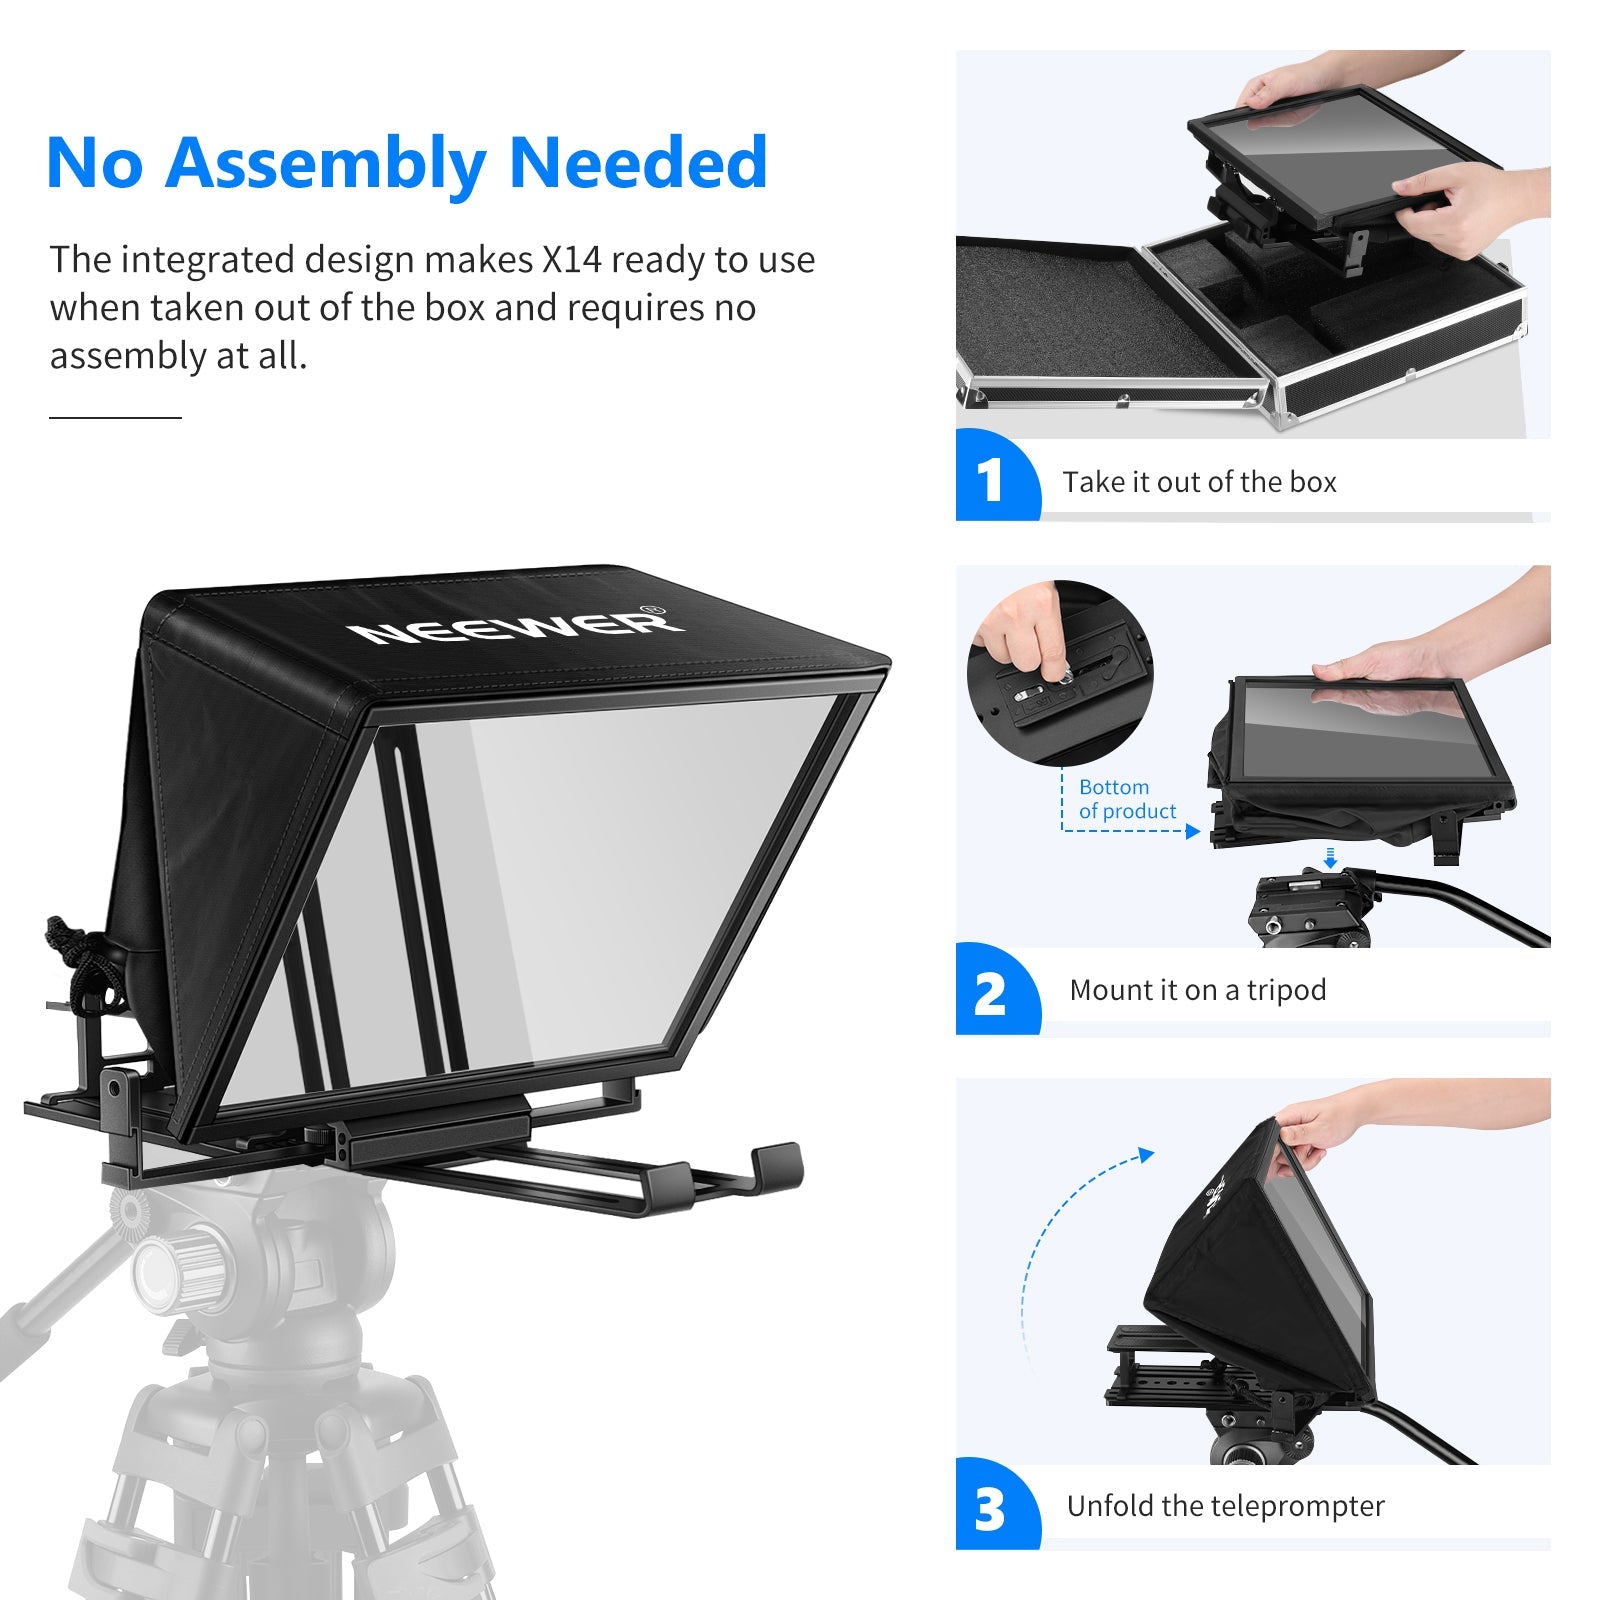 Teleprompter iPhone & Android, Double Phone Holder for Video Recording,  Neewer Teleprompter Kit, The Collapsing Design Allows for Easy Storage and